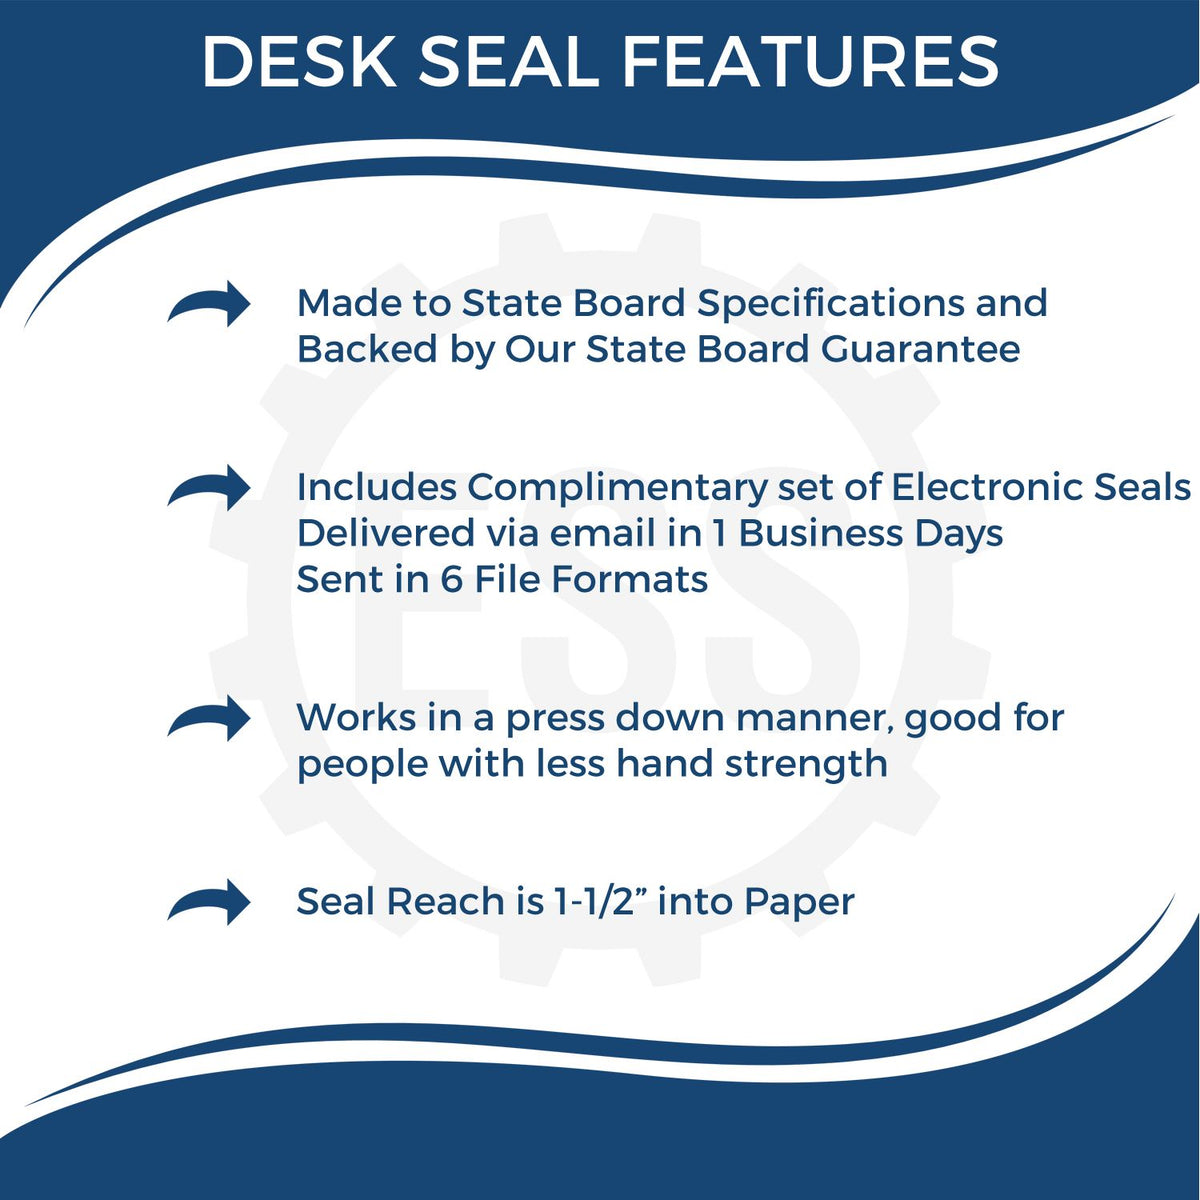 A picture of an infographic highlighting the selling points for the Texas Geologist Desk Seal